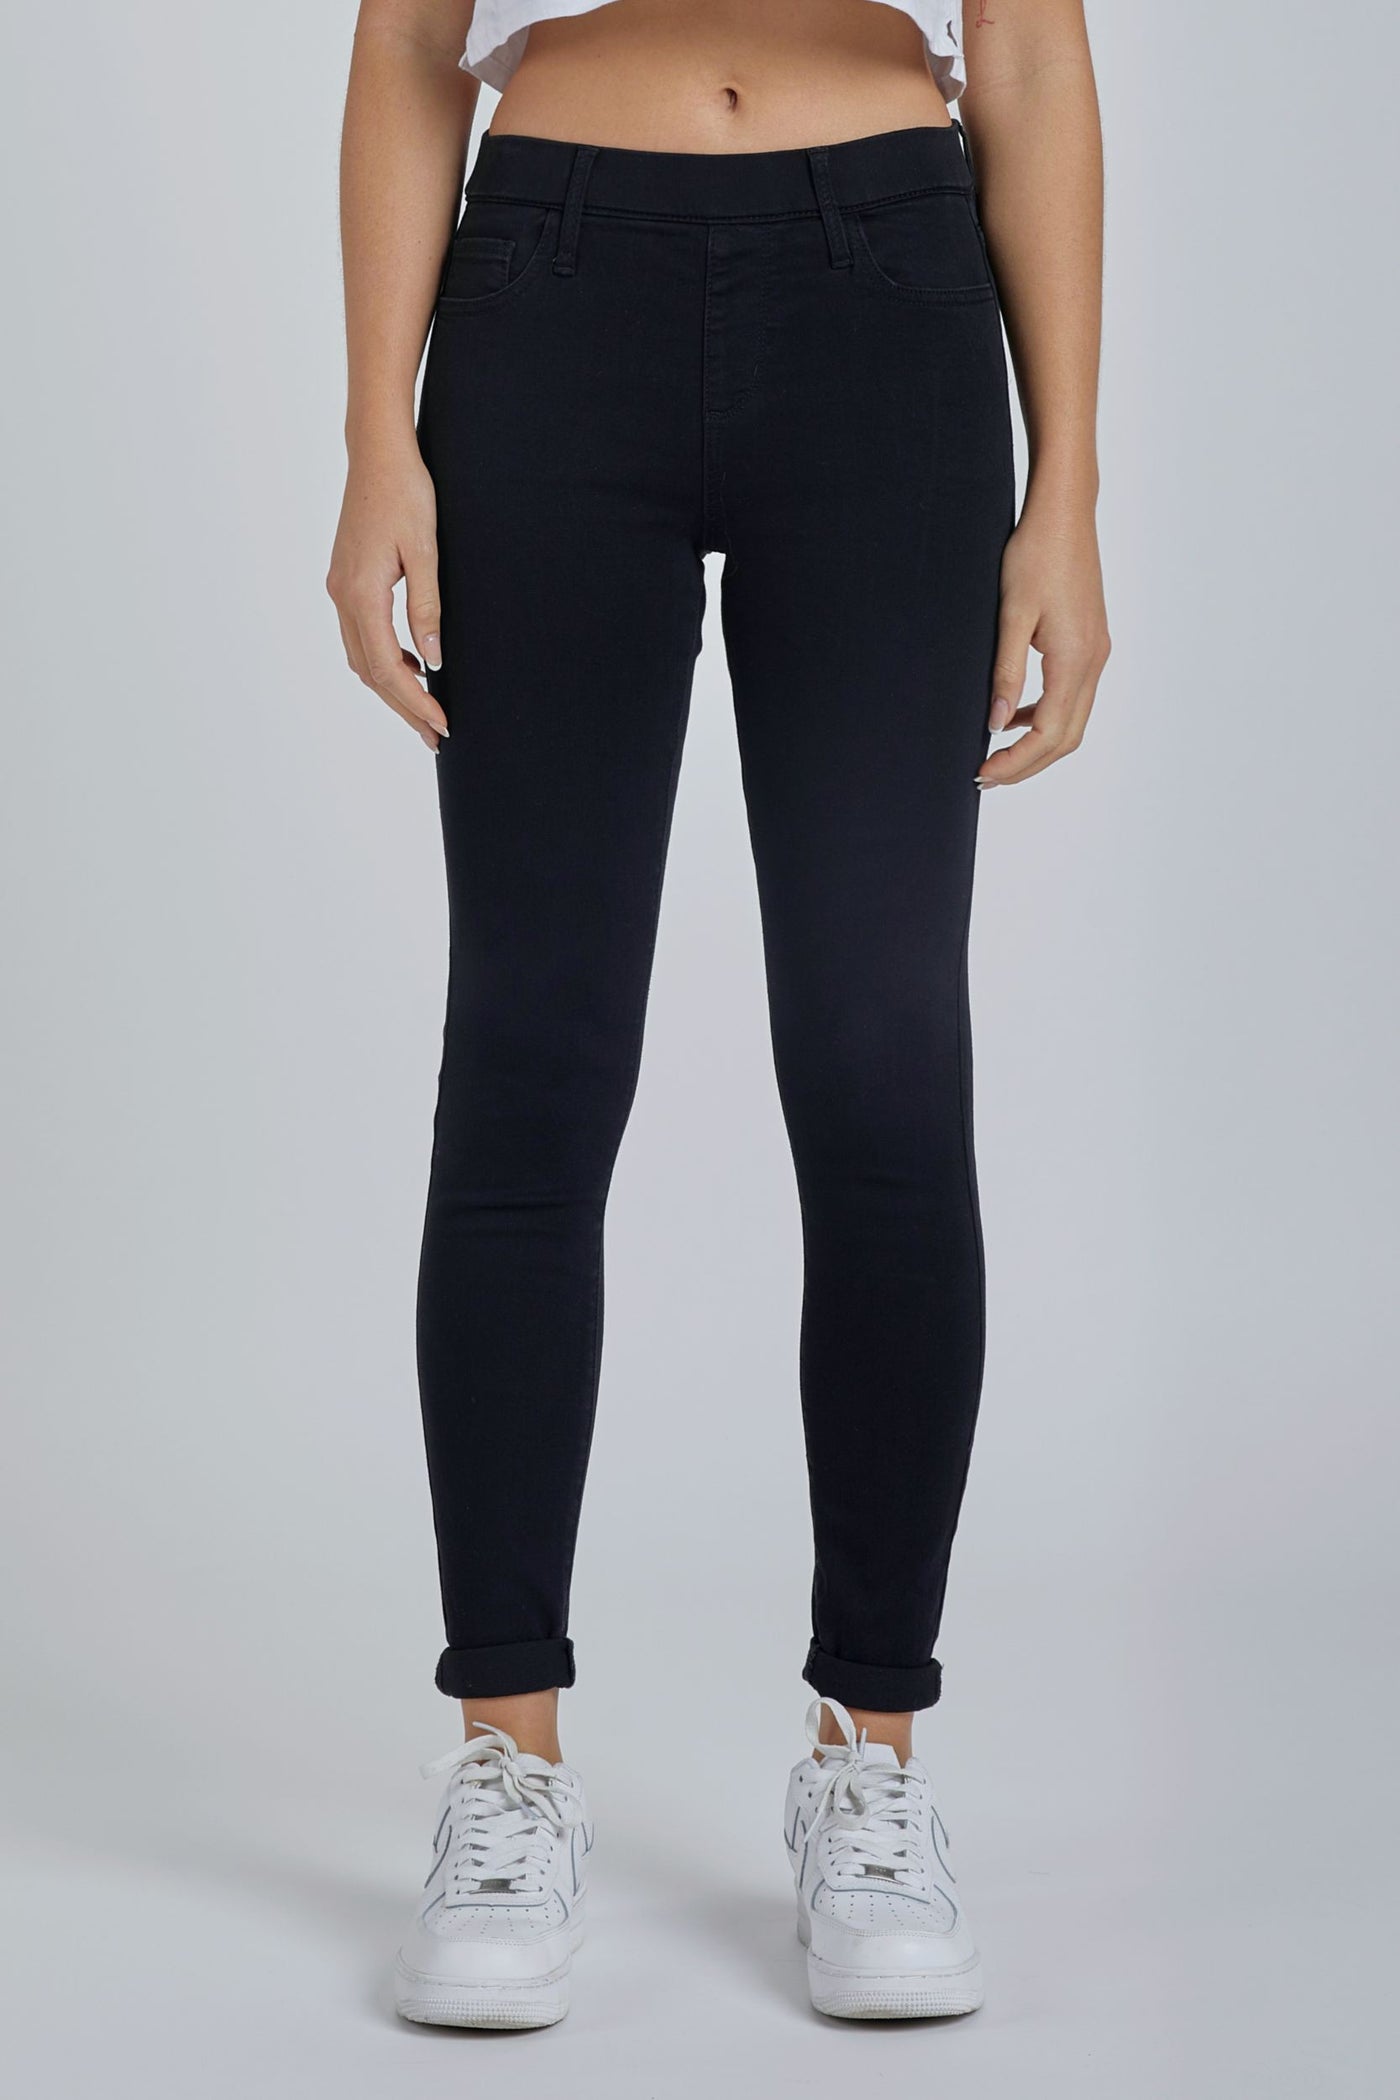 Cello Black Mid Rise Pull On Crop Skinny Jeans